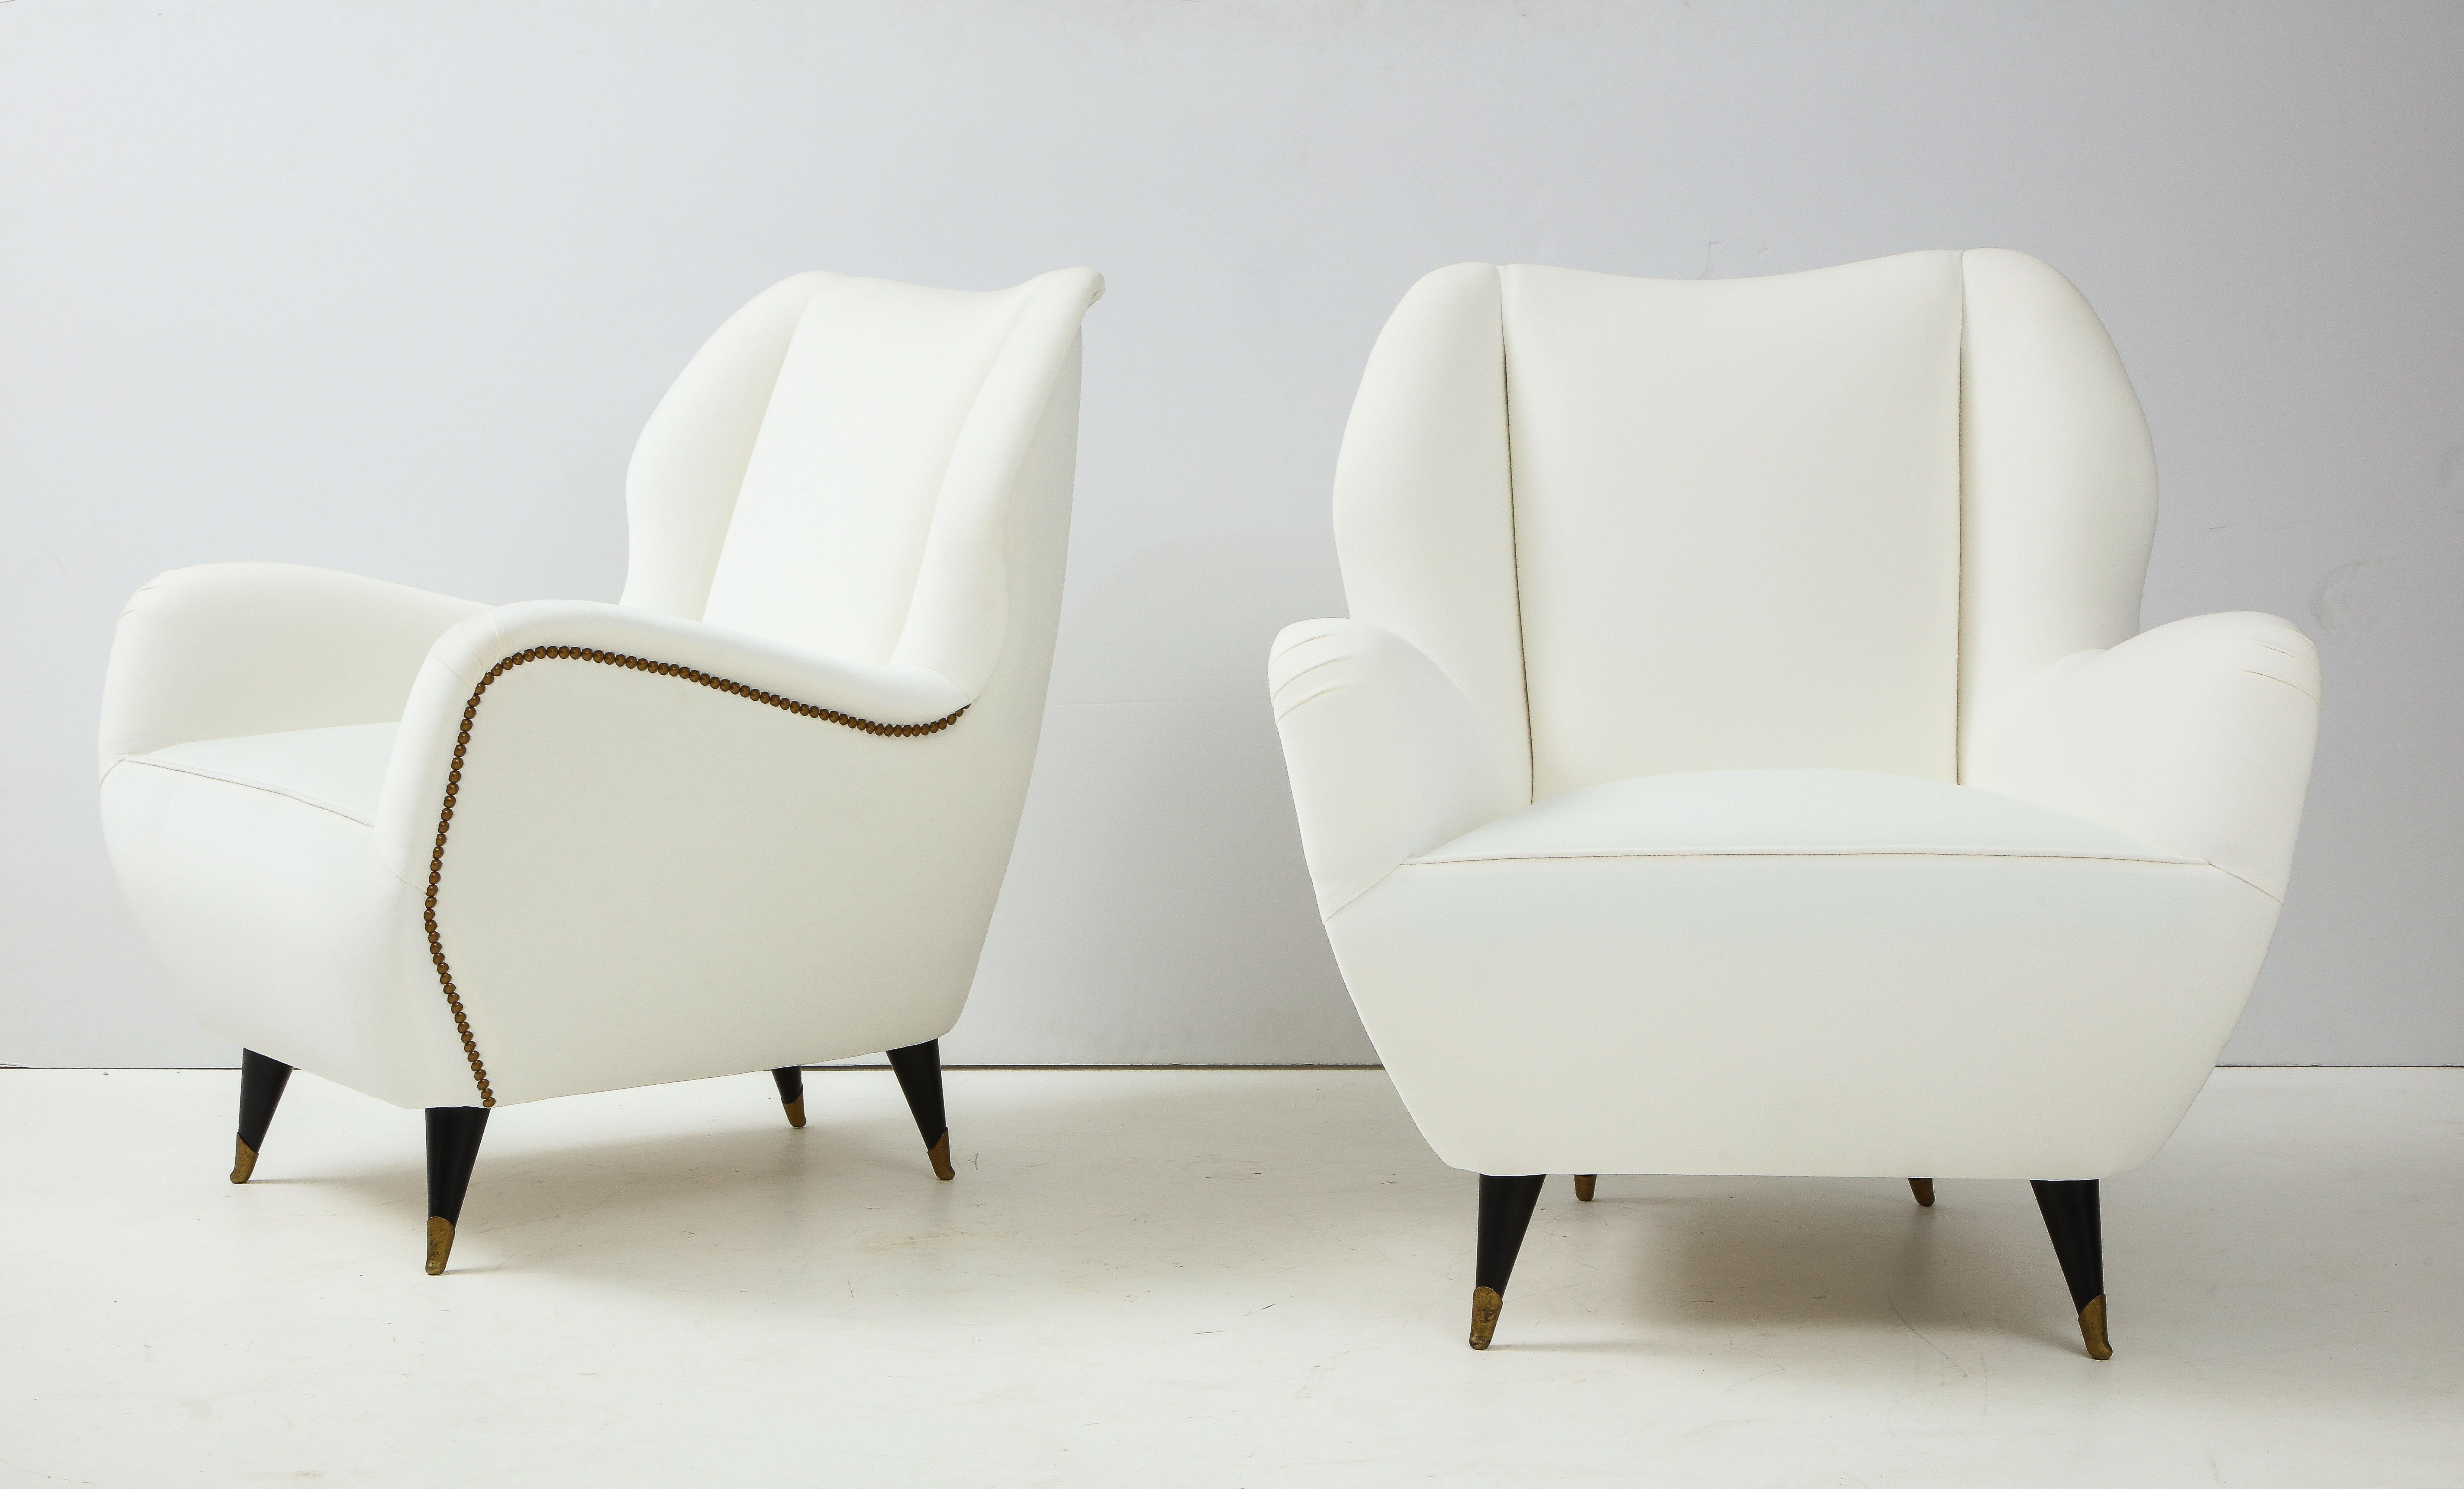 Pair of Sculptural Italian Vintage Lounge Chairs, Attributed to Gio Ponti For Sale 4